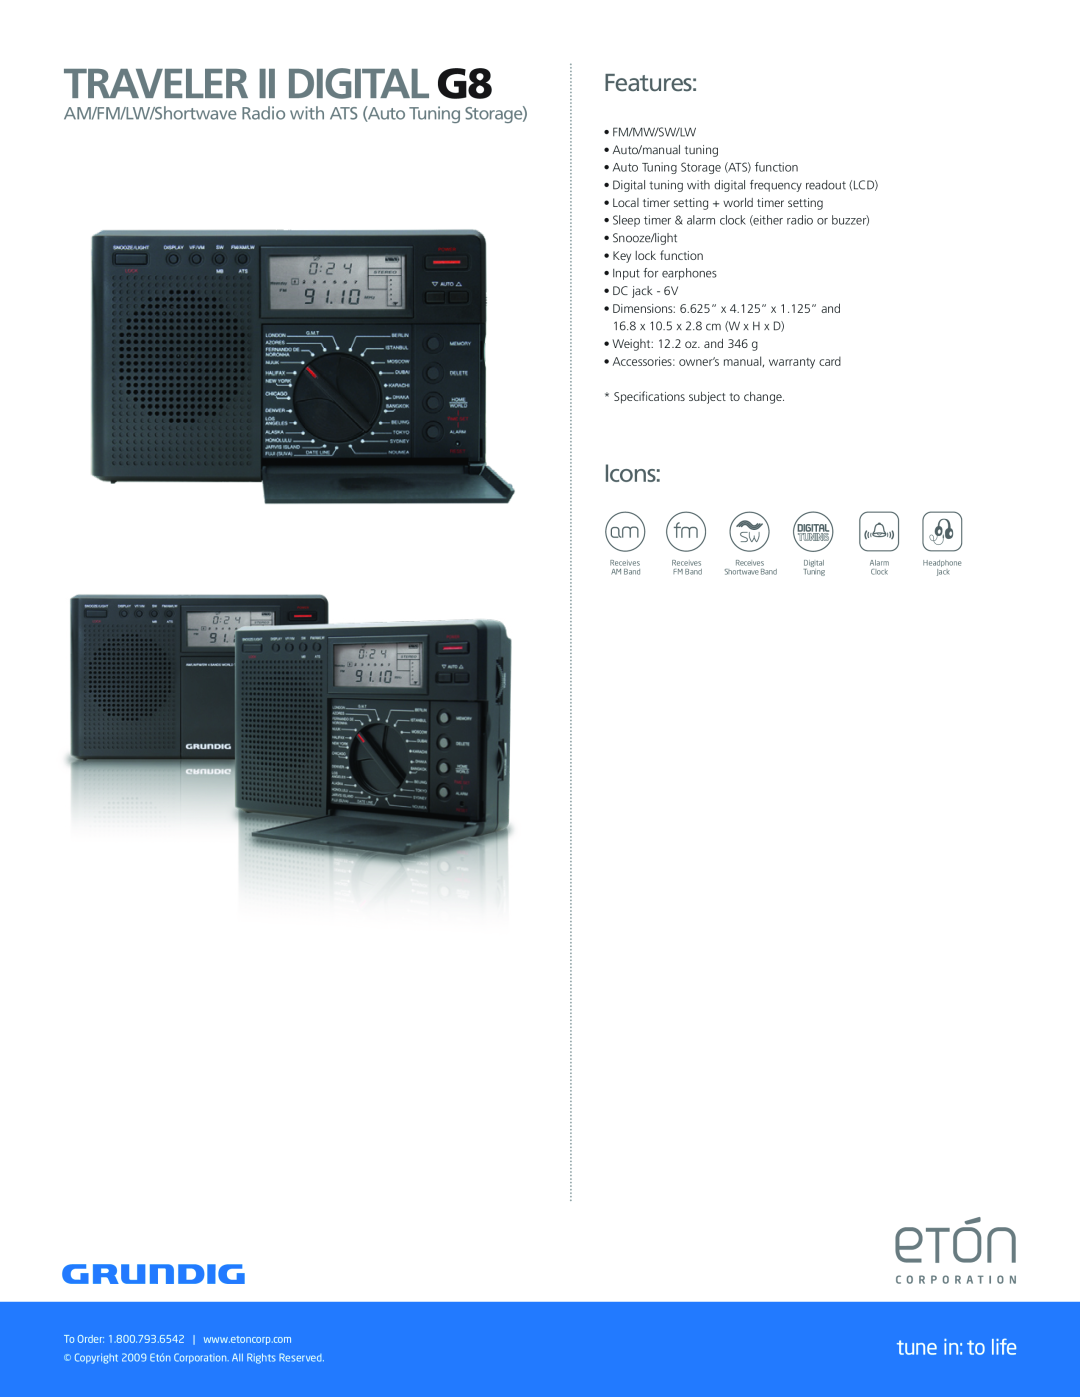 Eton Radio dimensions TRAVELER II DIGITAL G8, Features, Icons, tune in to life 